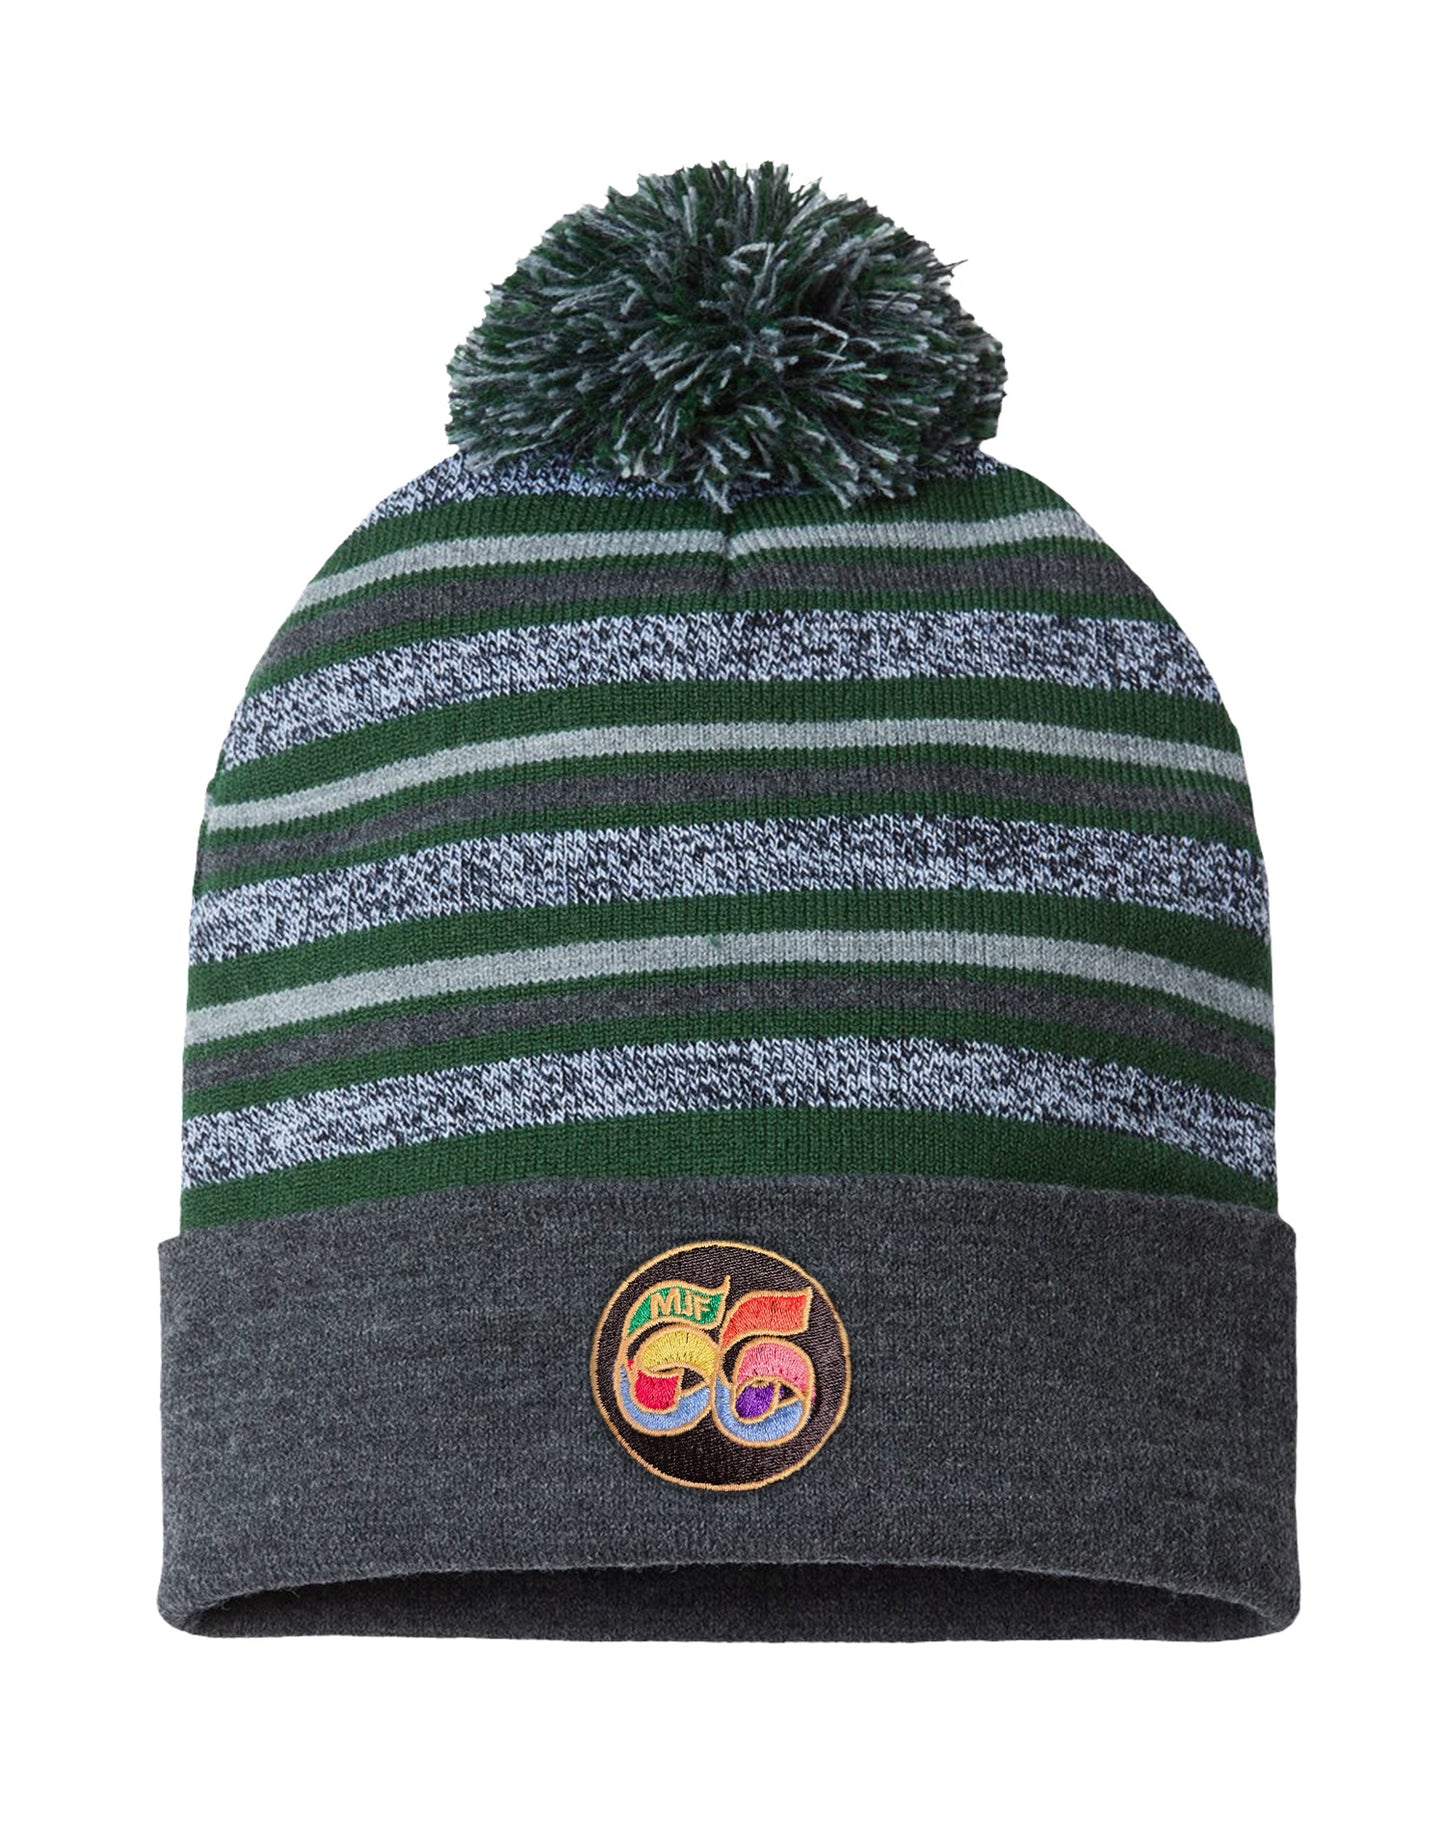 Green and Grey MJF 66 Bobble Hat